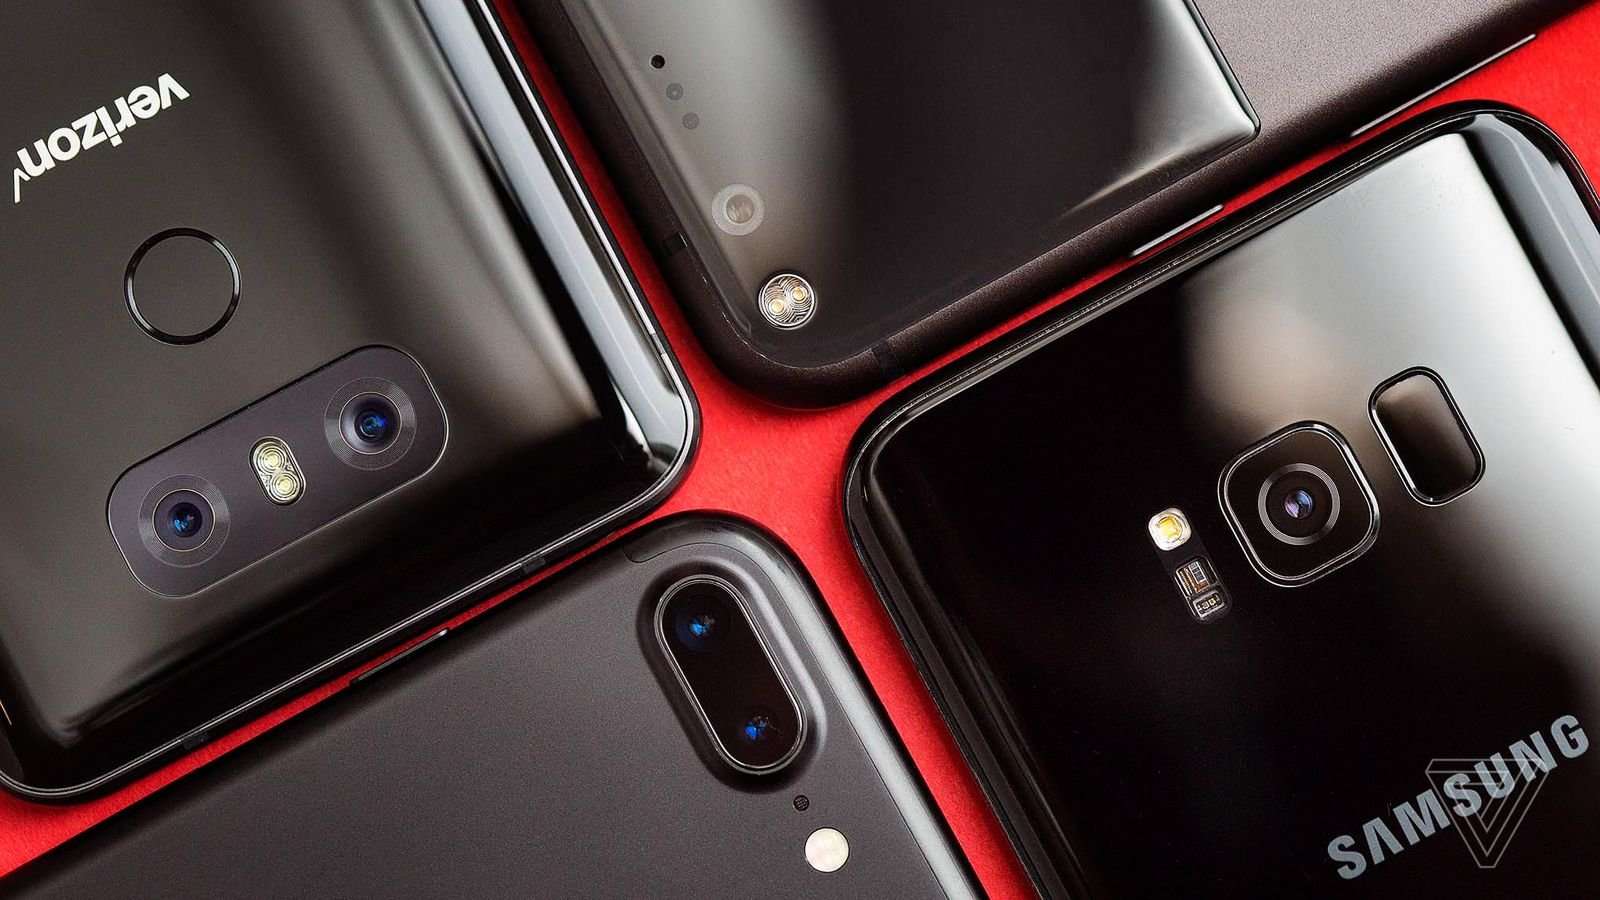 image for Smartphone camera shootout: Galaxy S8 vs. iPhone 7, Google Pixel, and LG G6